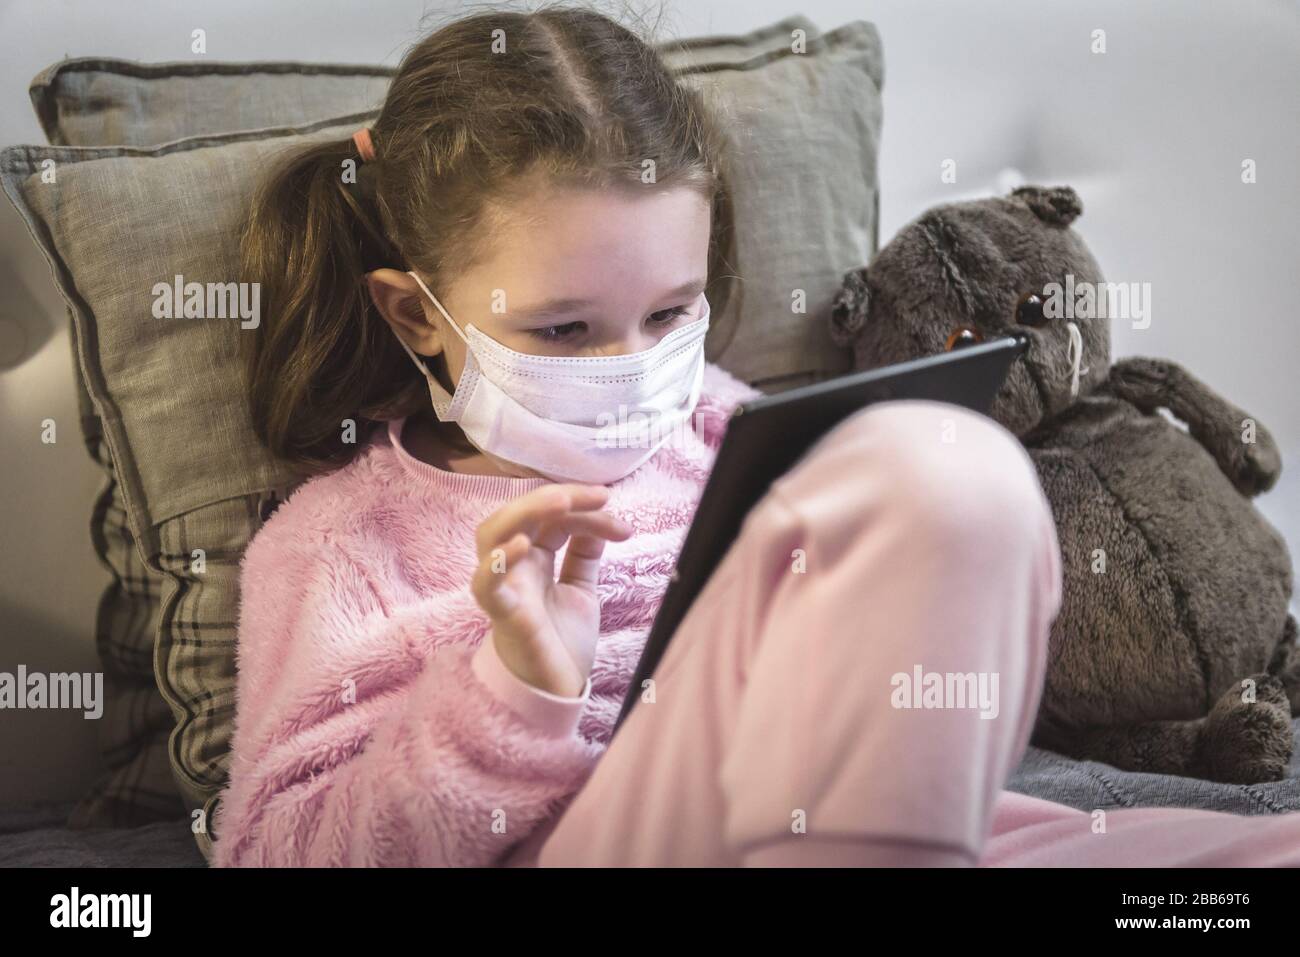 COVID-19 coronavirus quarantine concept, little girl in medical mask plays with digital tablet at home. Kid uses computer in room during COVID coronav Stock Photo